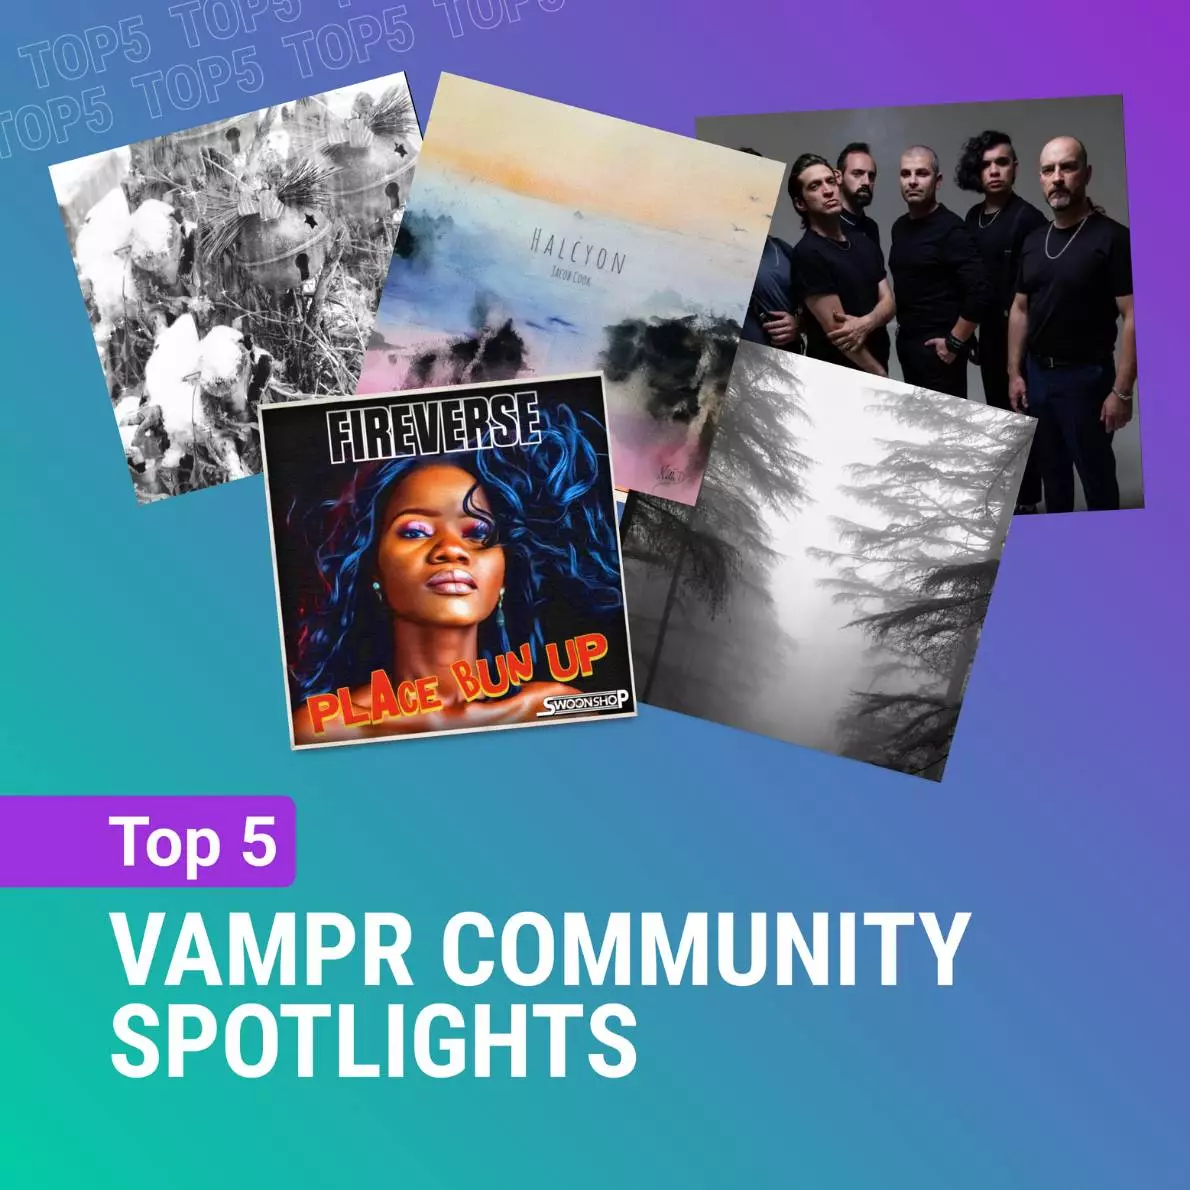 Top 5 Vampr Community Spotlights text with 5 images above of the people spotlighted.